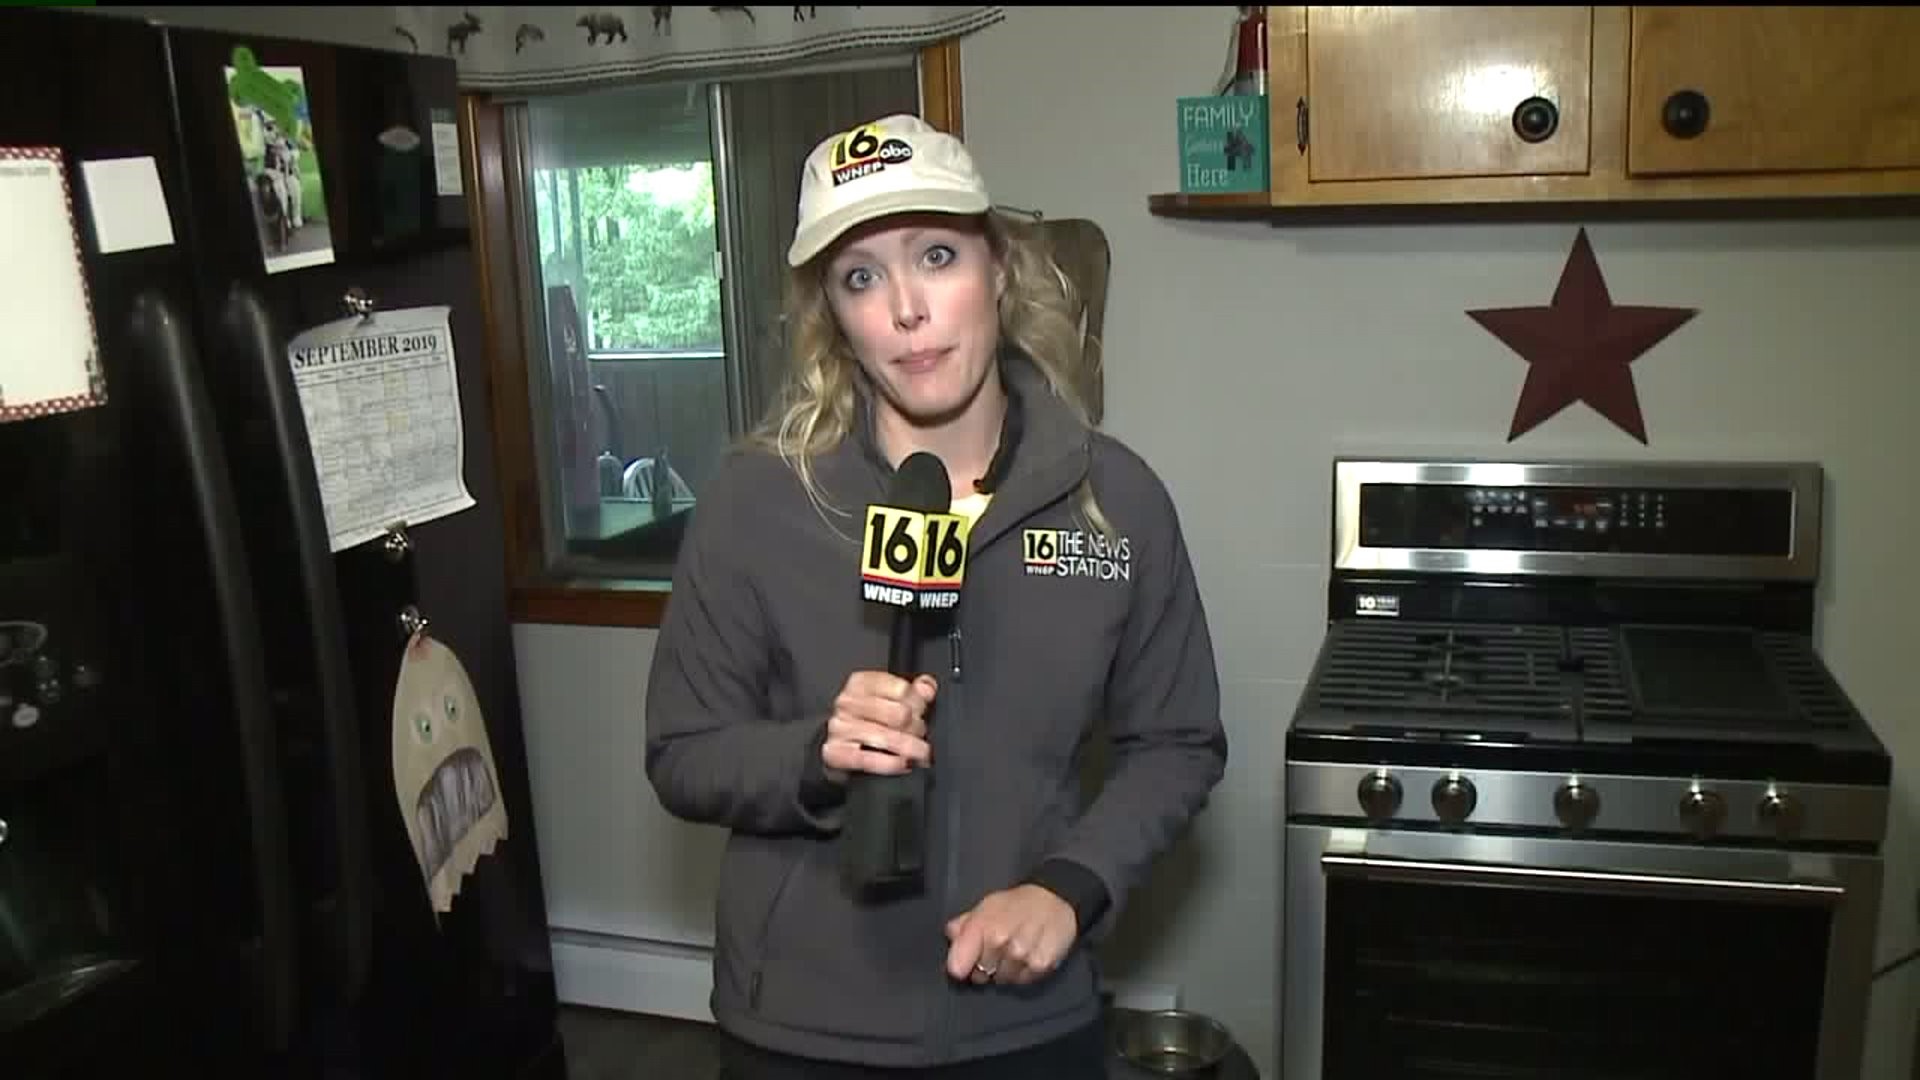 Home Security System Saves Family from Carbon Monoxide Leak